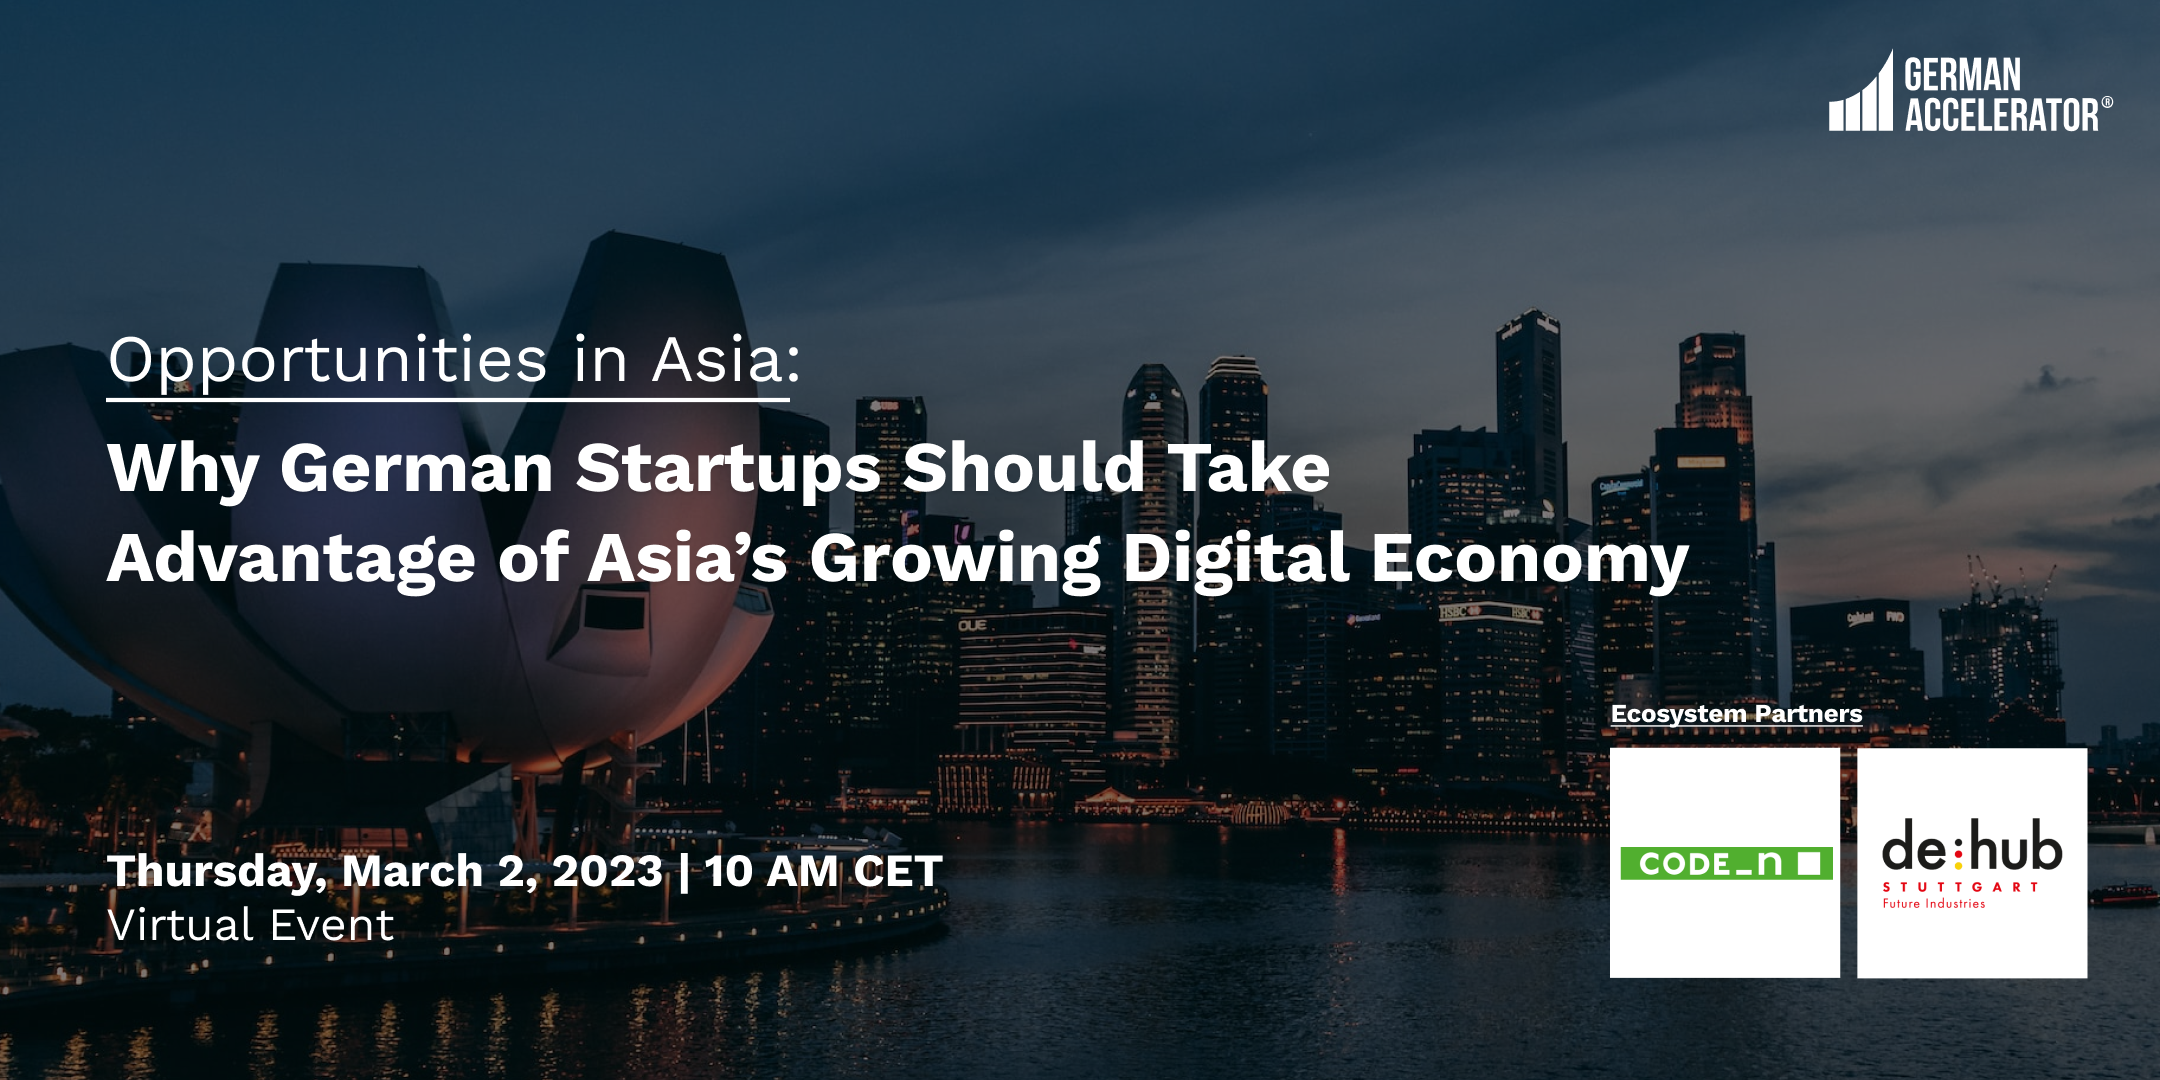 Why German Startups Should Take Advantage of Asia's Growing Digital Economy